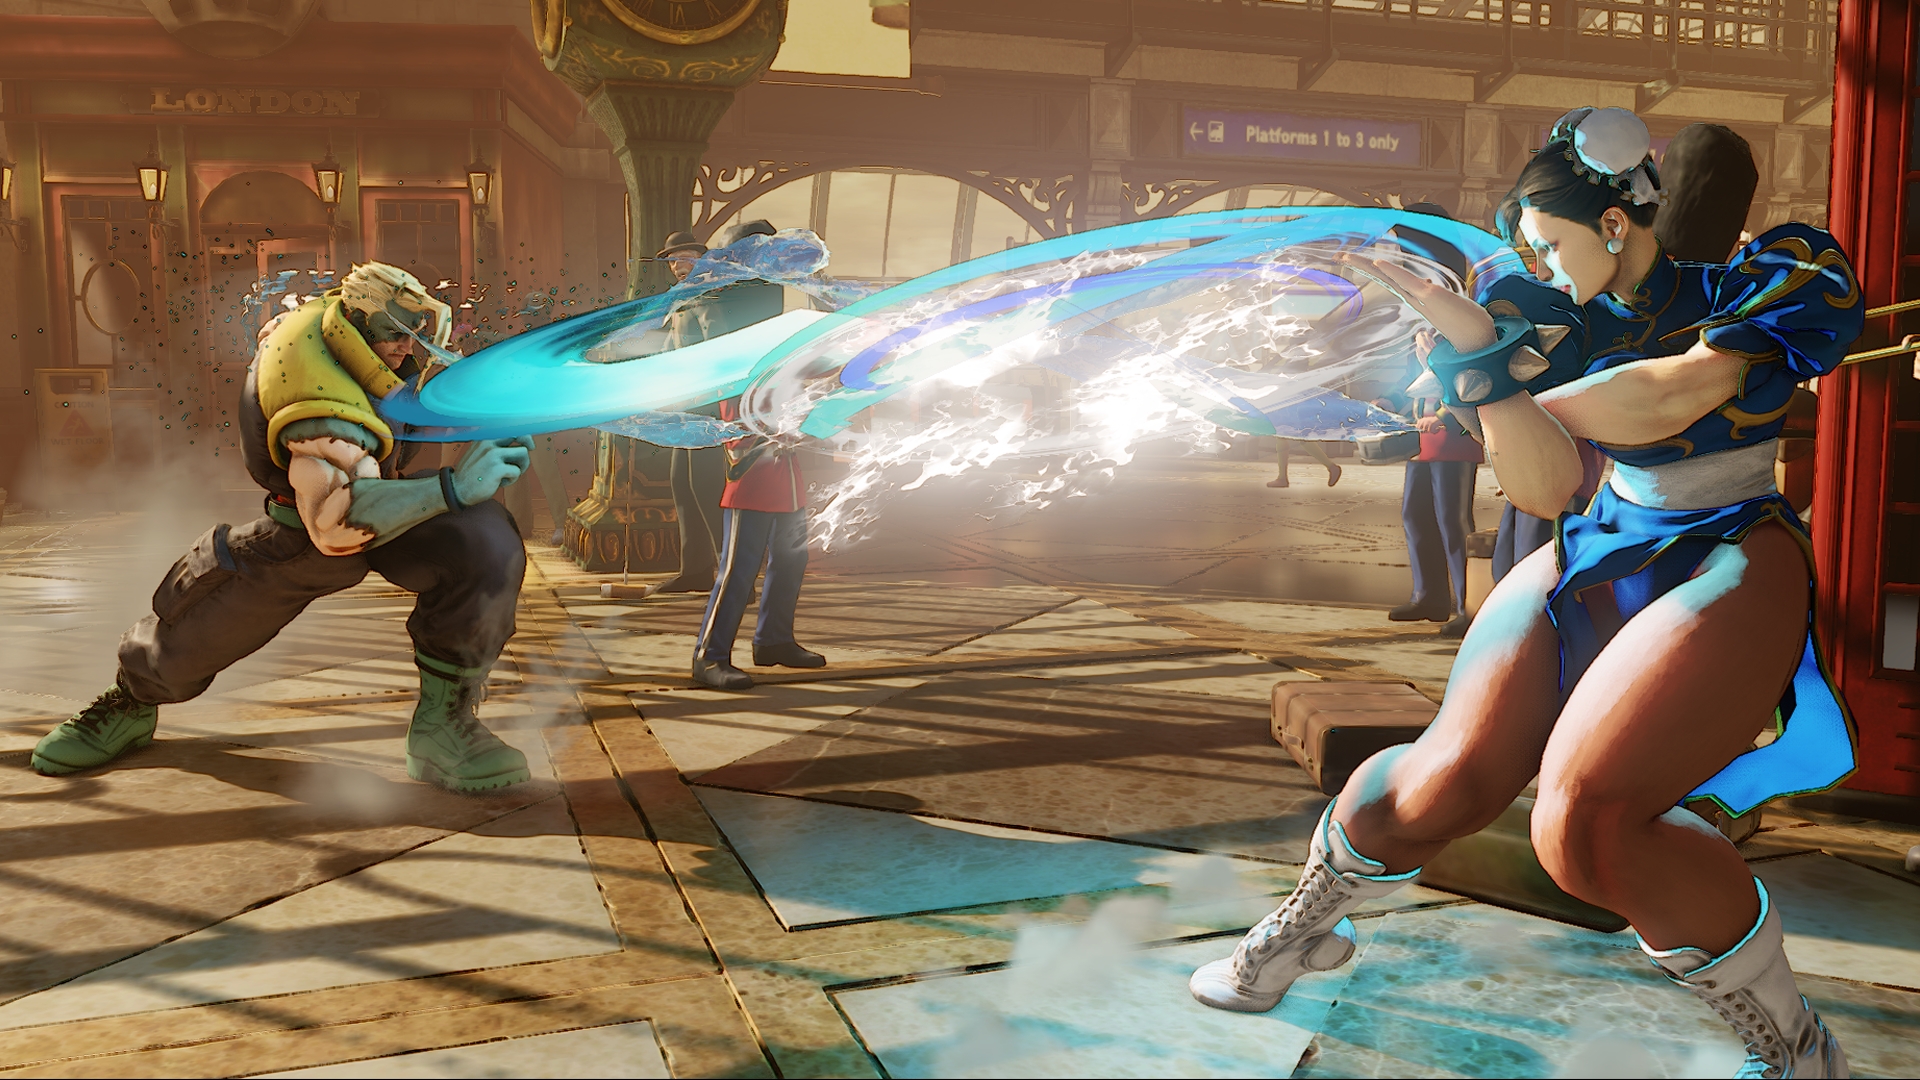 Street Fighter 5 adds Birdie, Cammy and a beta - Polygon